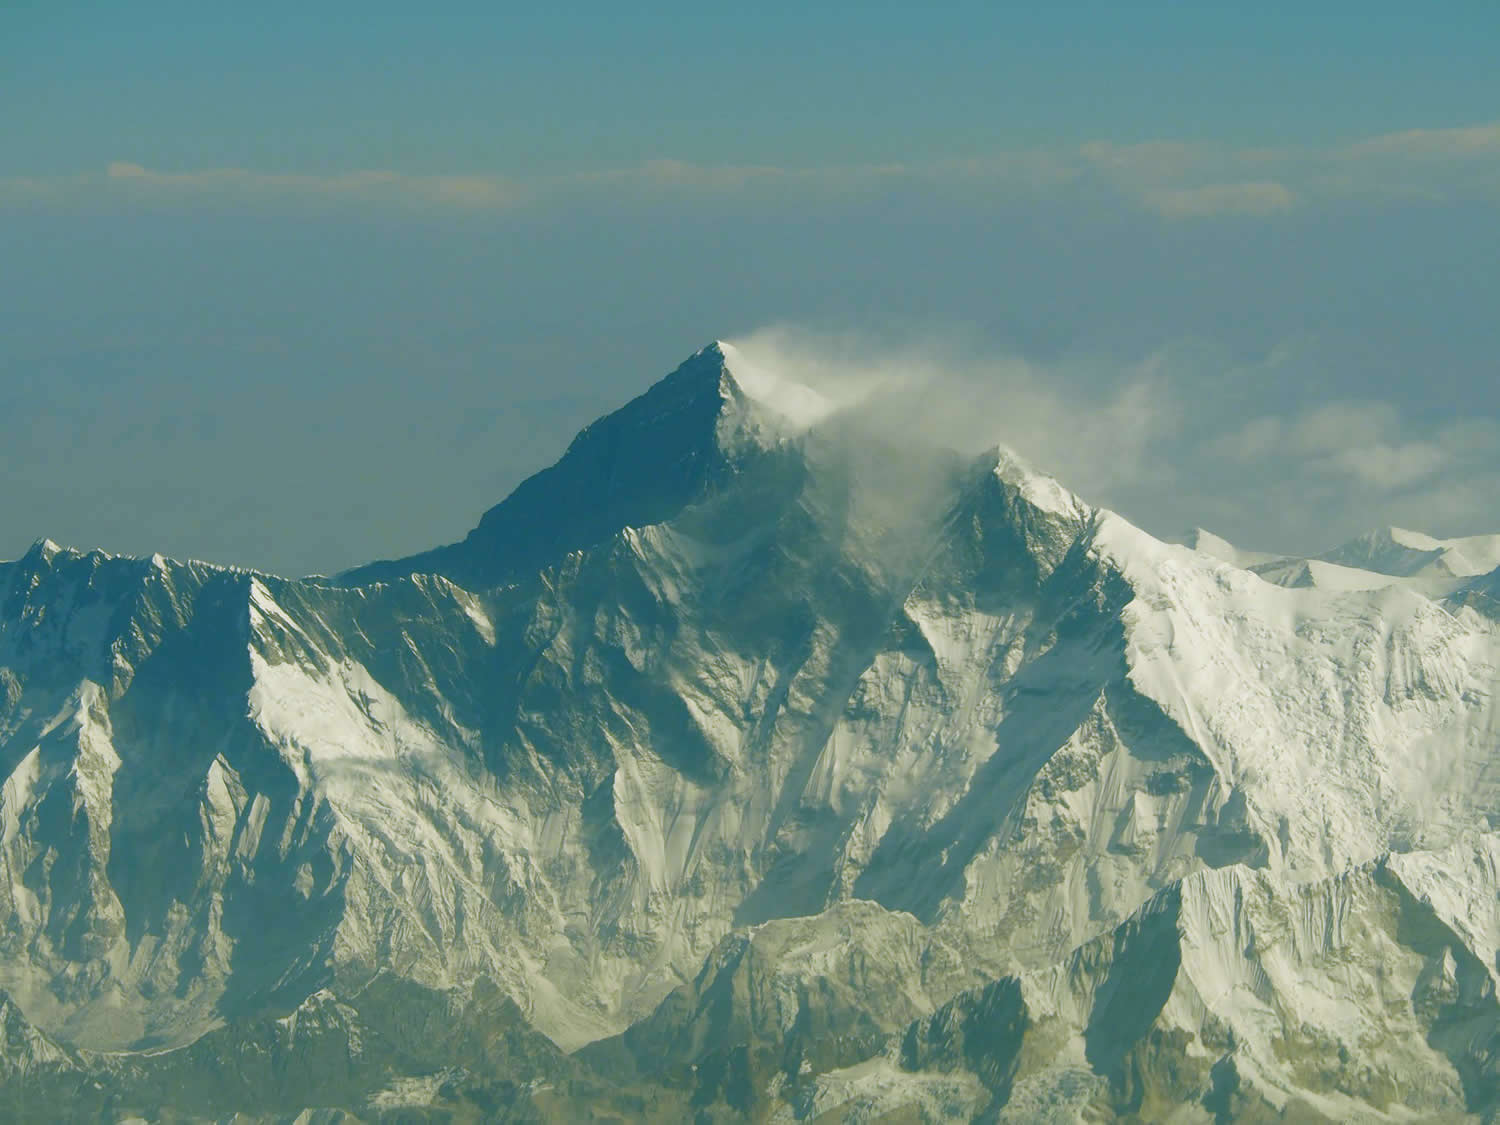 The flight passed over the Himalayan mountain range and offered a spectacular view of Mt. Everest.